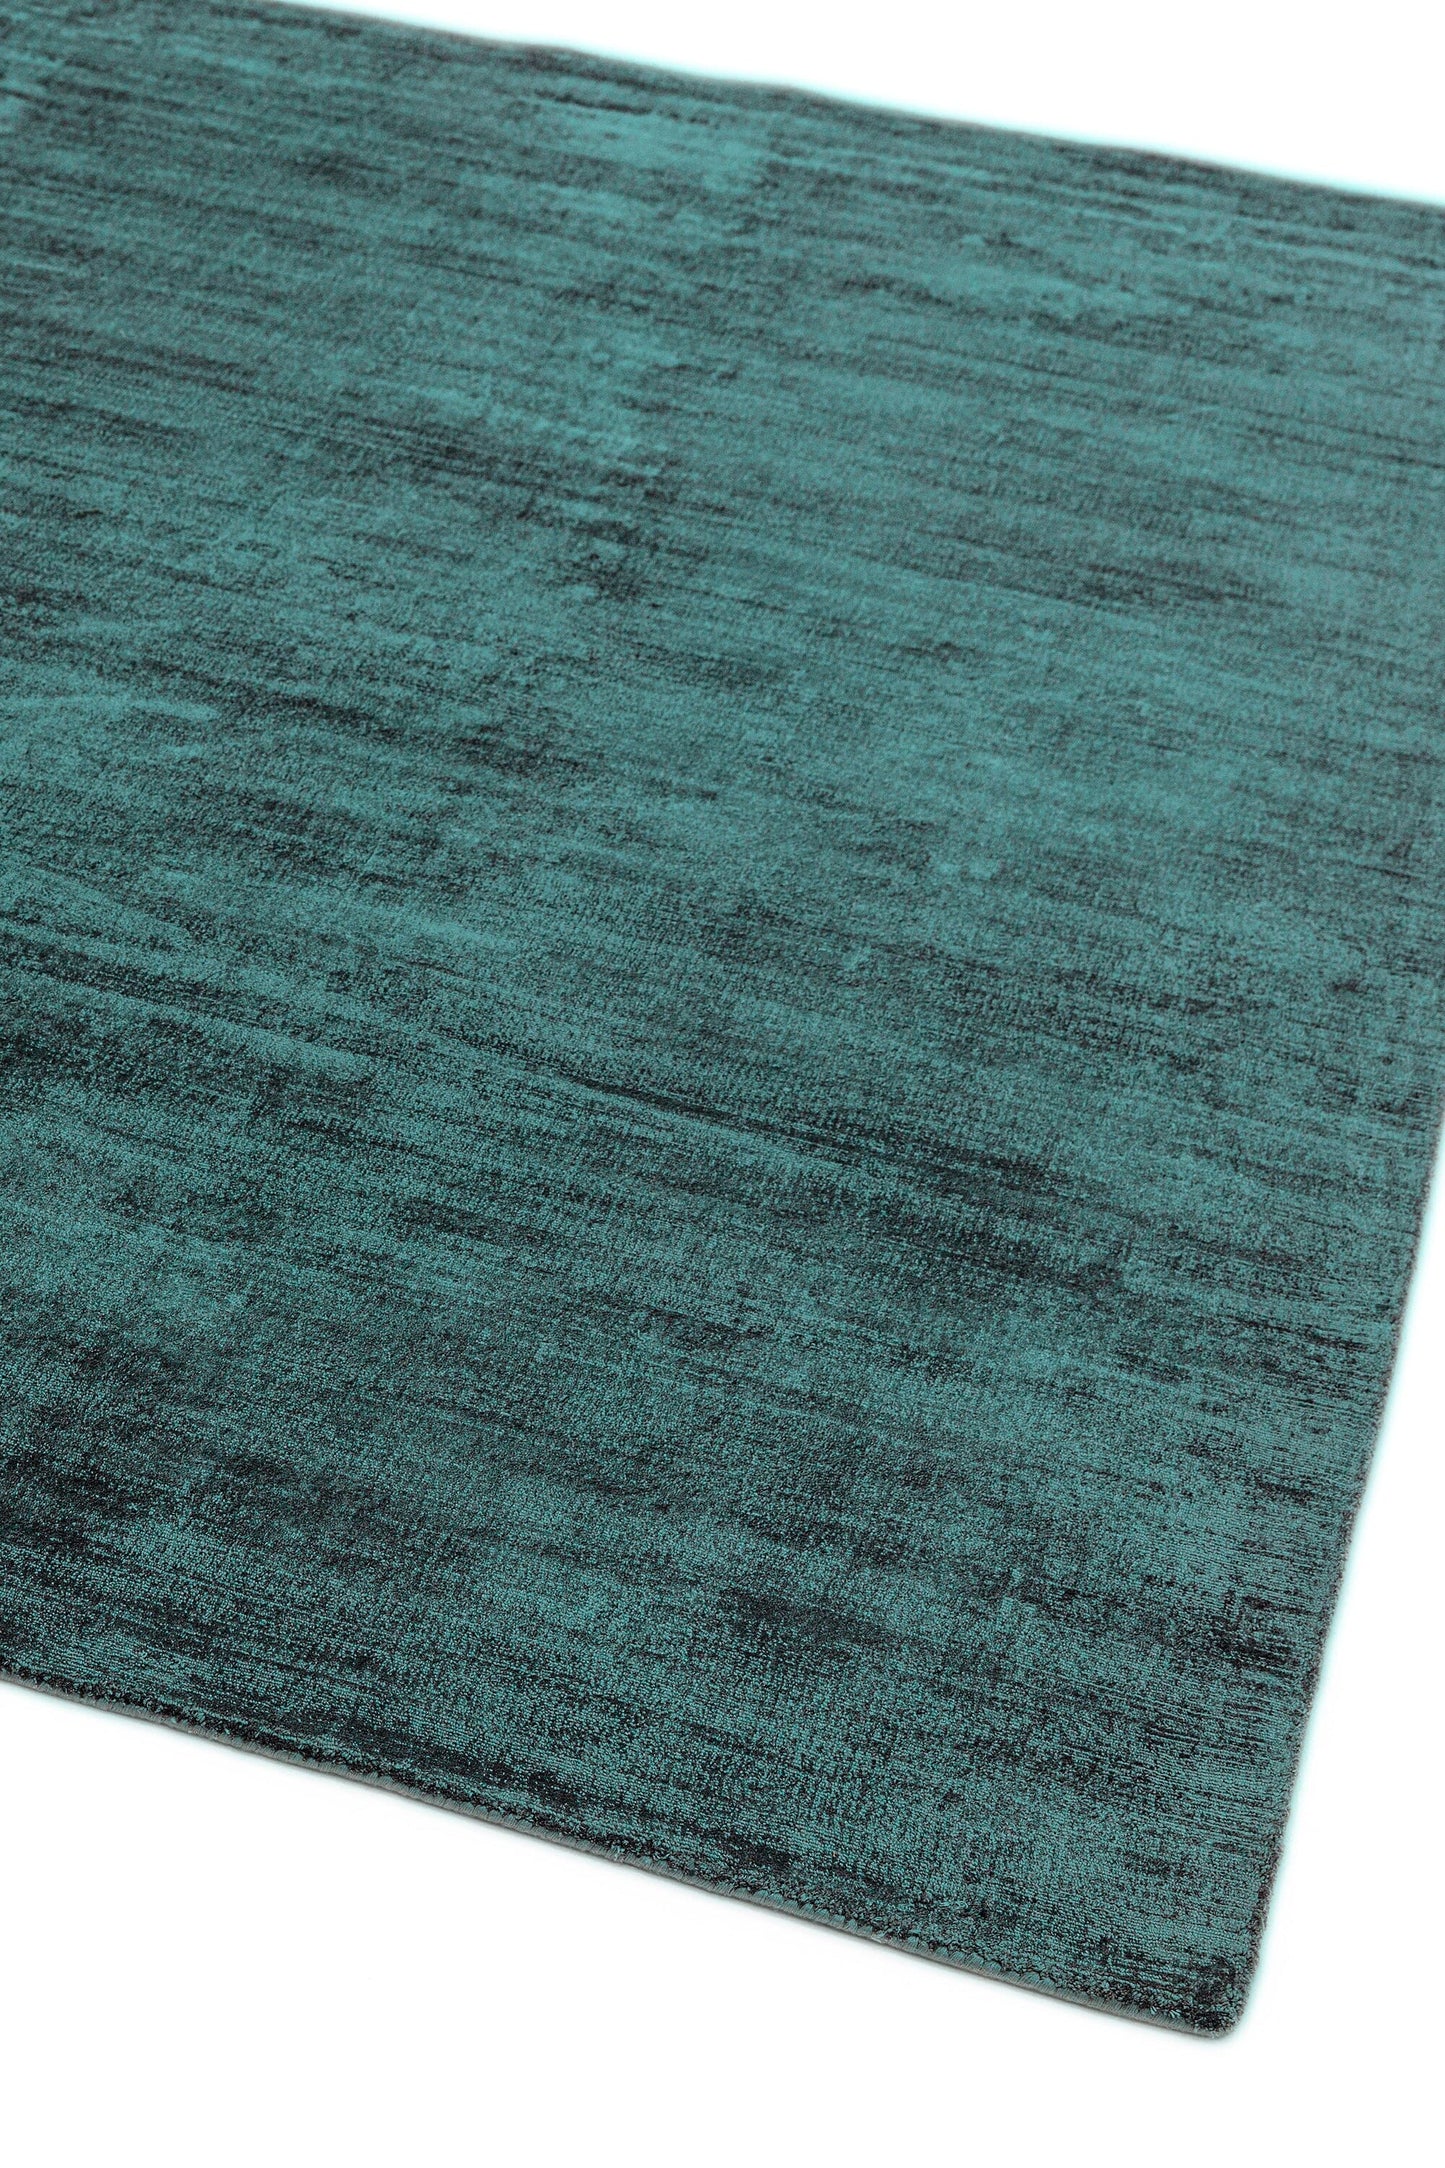 Asiatic Carpets Blade Hand Woven Rug Teal - 120 x 170cm